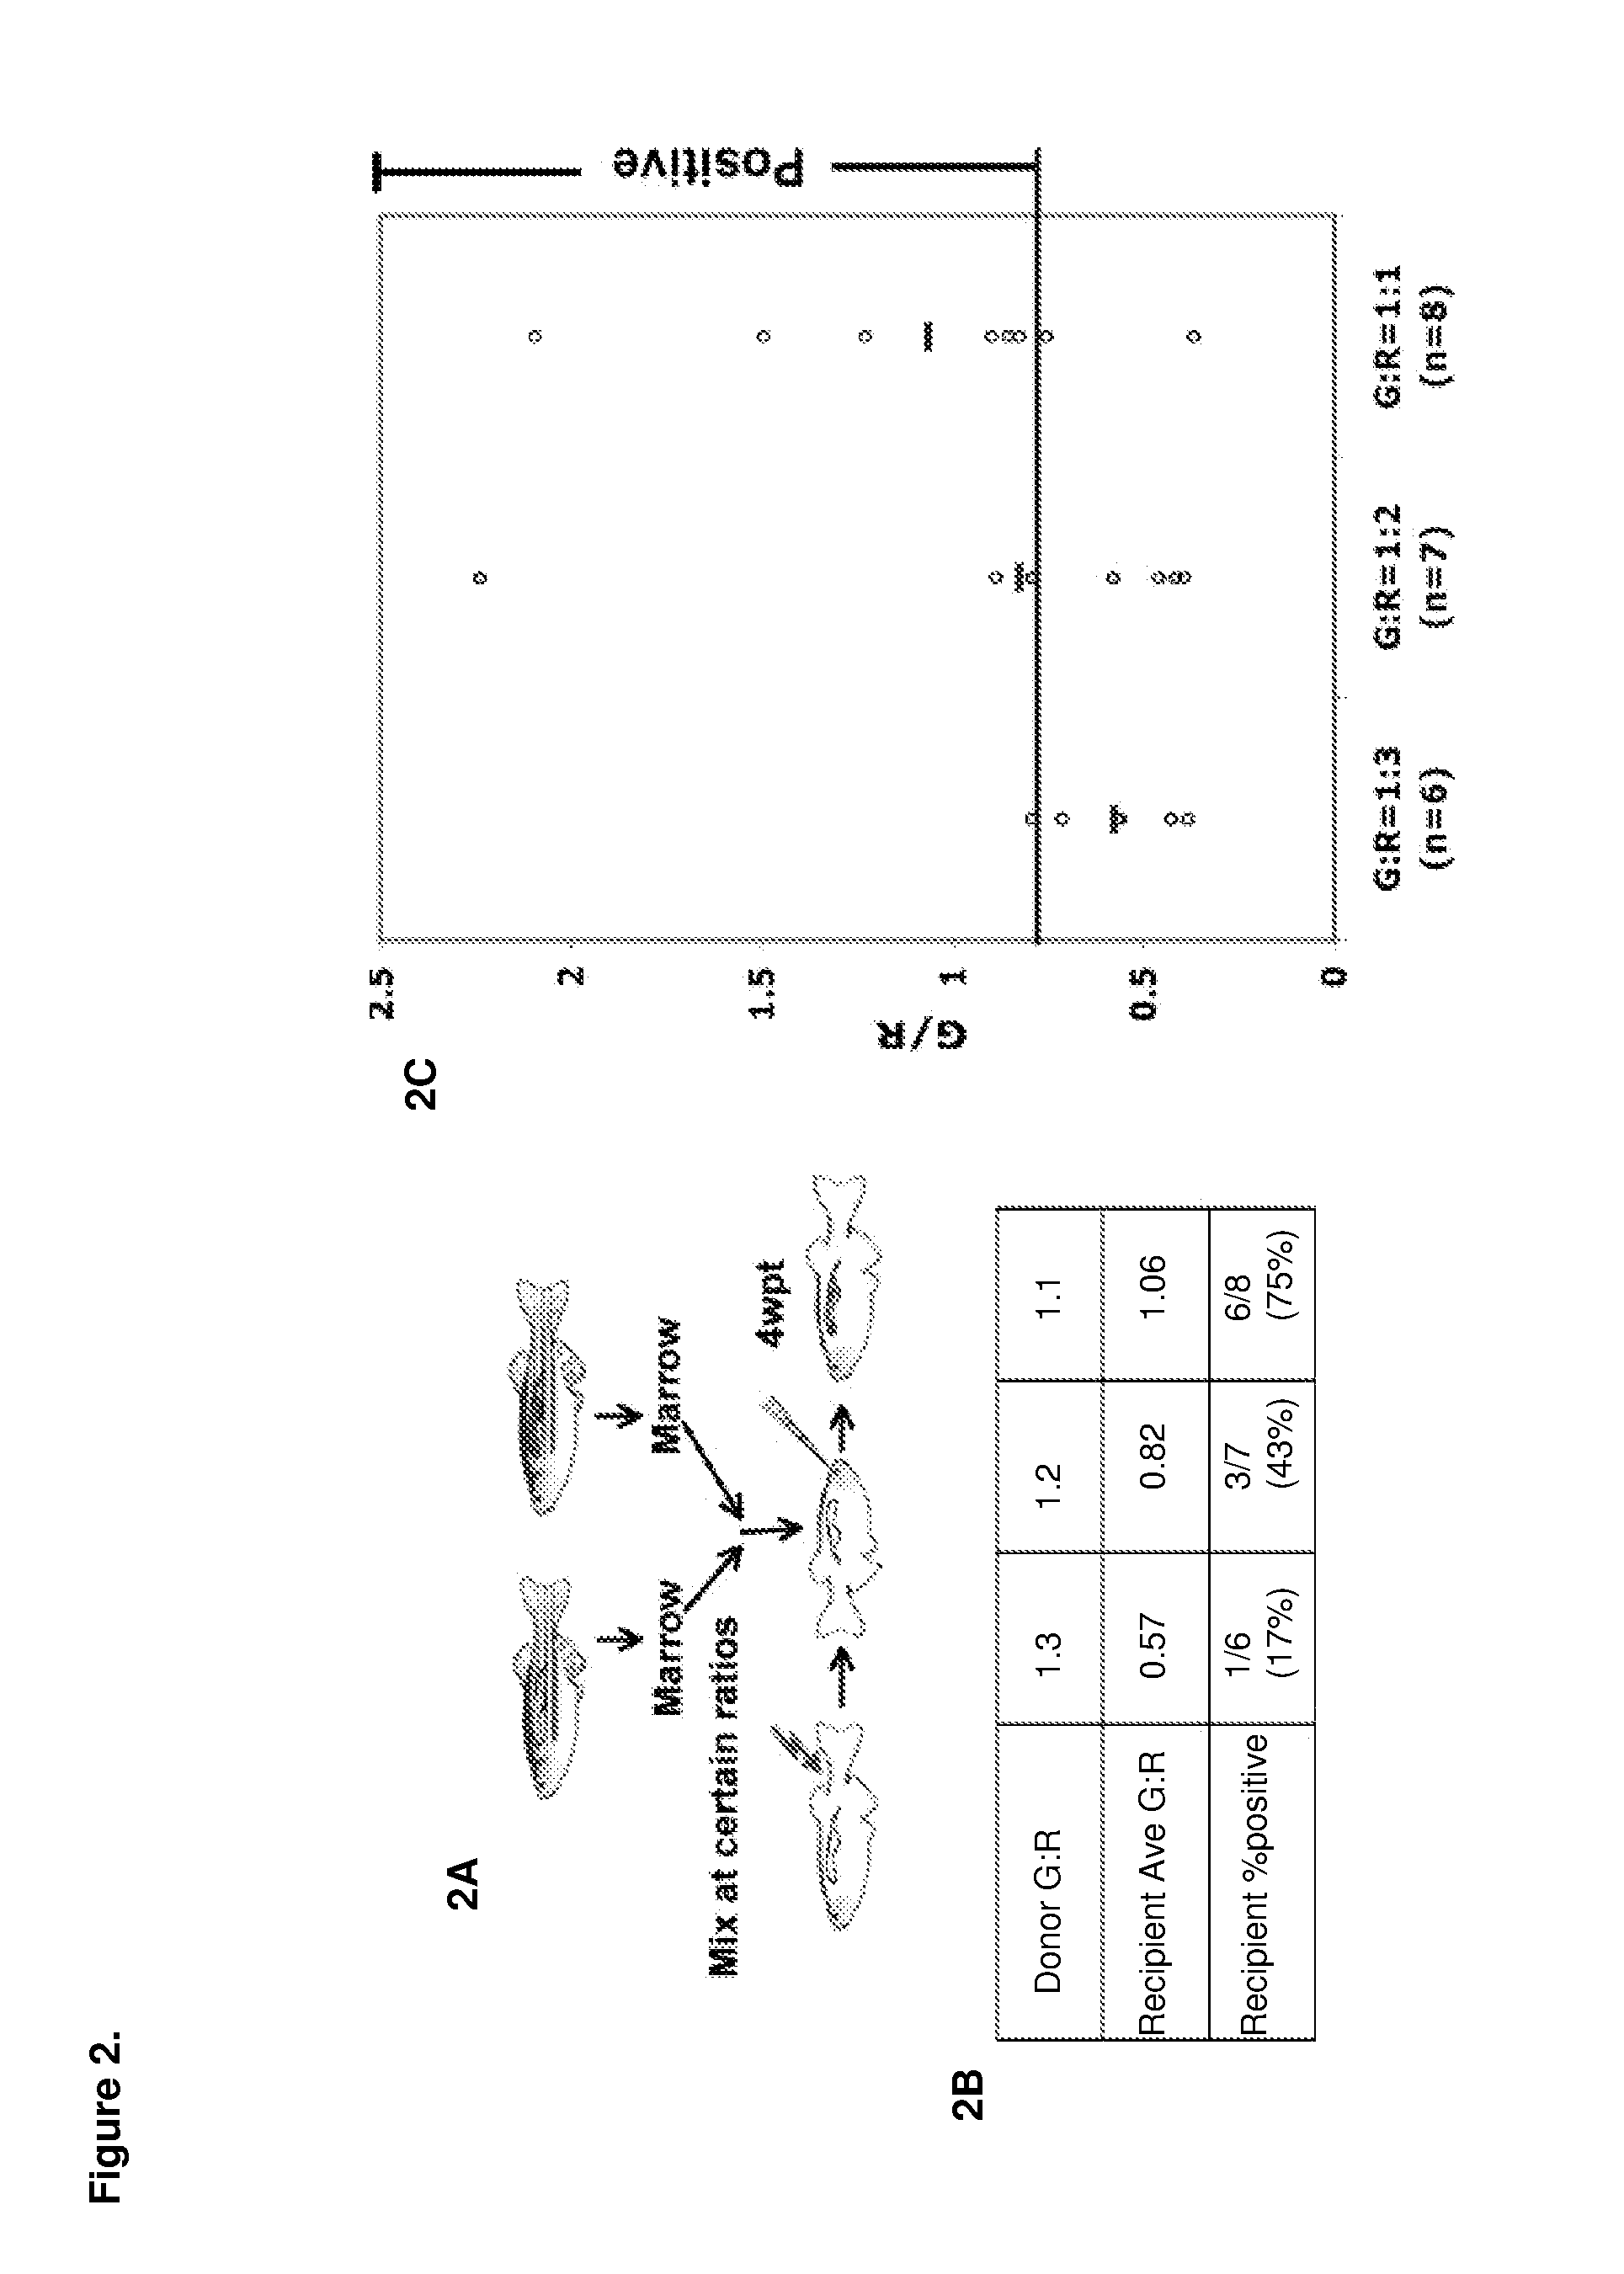 Methods for enhancing hematopoietic stem/progenitor cell engraftment